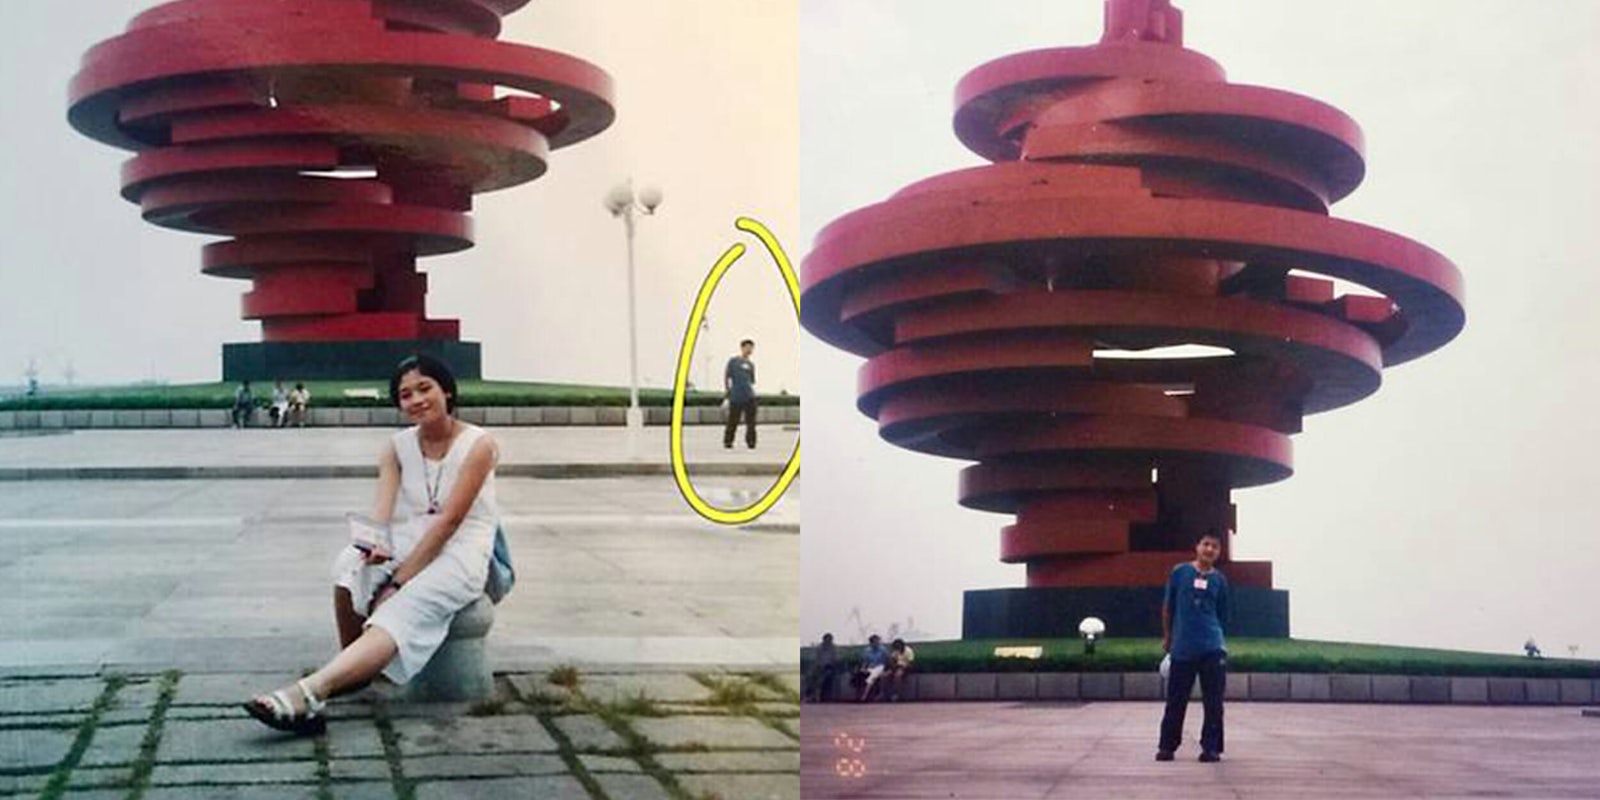 Man and woman posing in May Fourth Square, Qingdao, in separate photos 11 years before they met